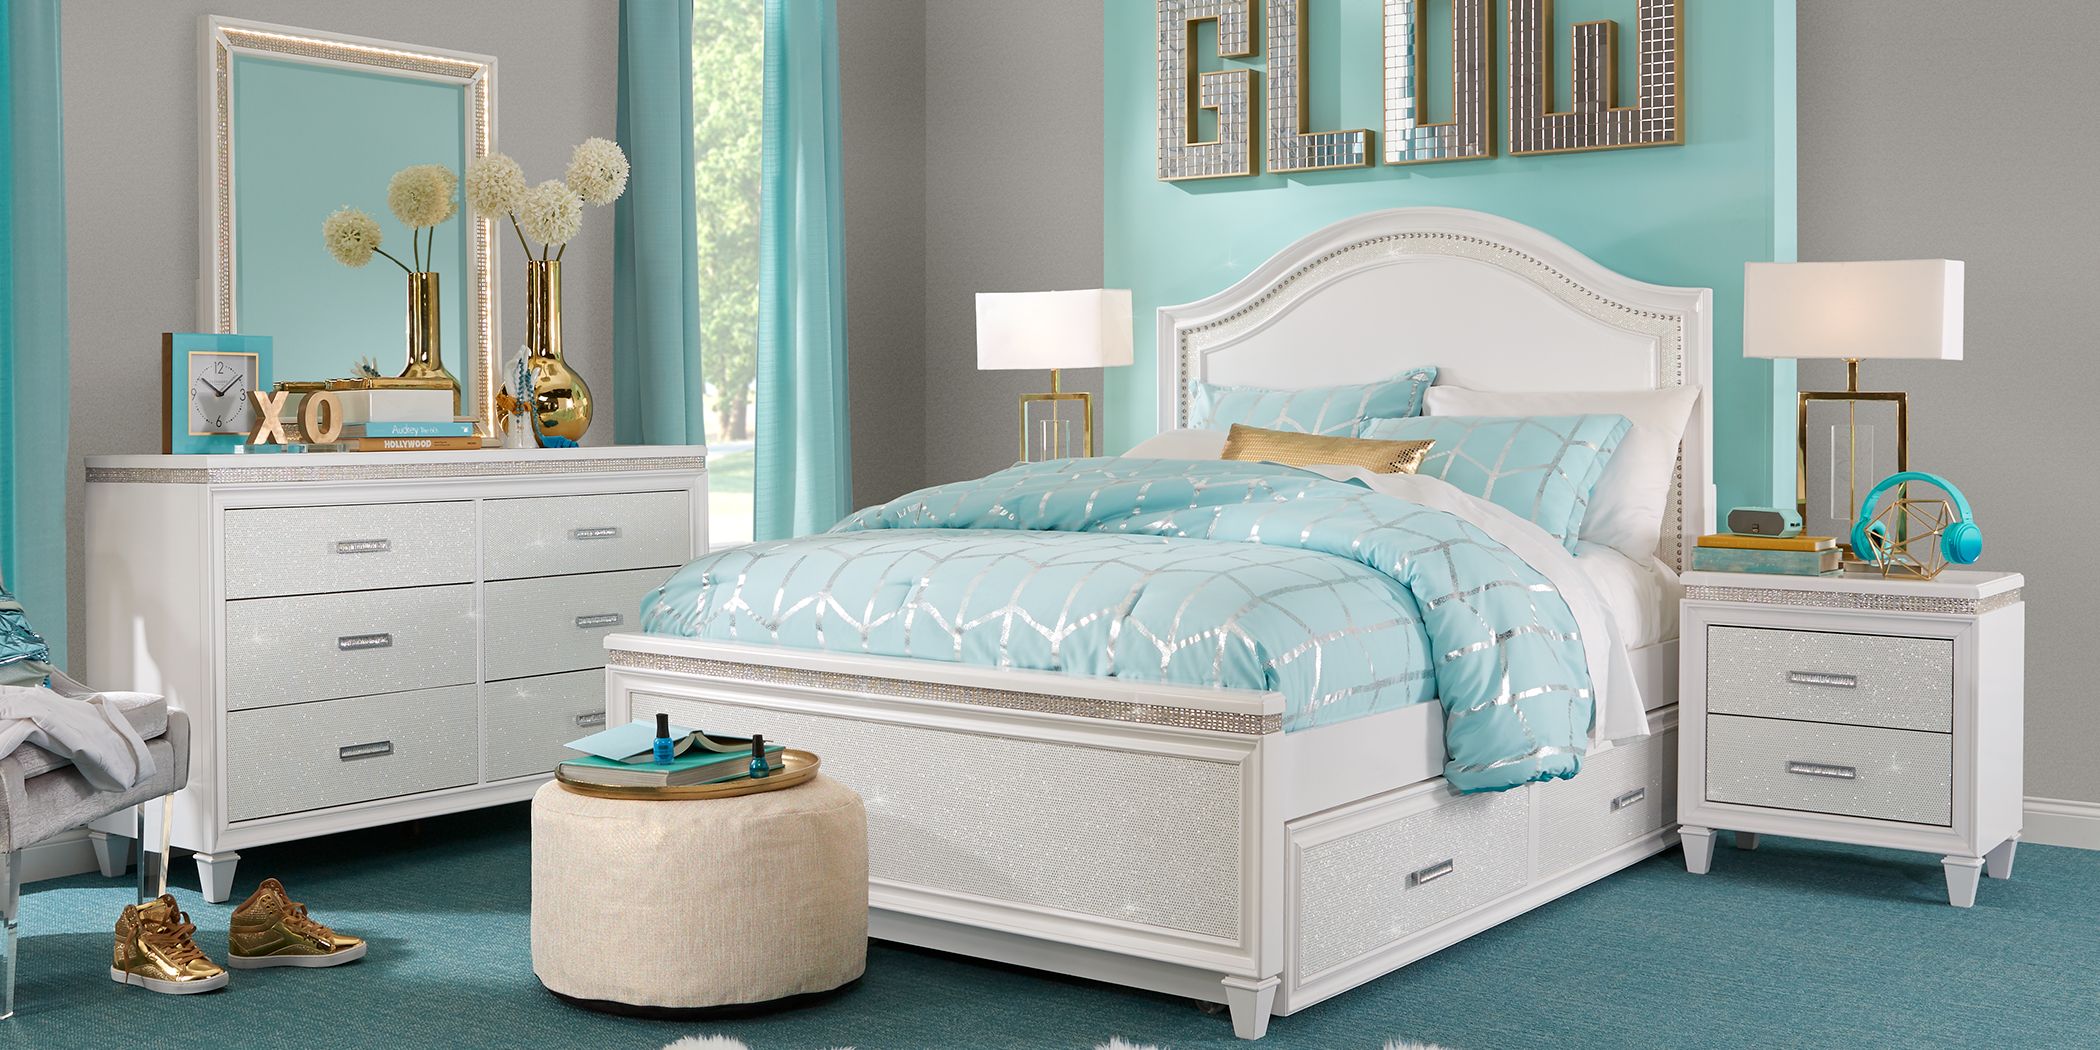 Girls Twin Size Bedroom Furniture Set, Grey And White Twin Bed Set